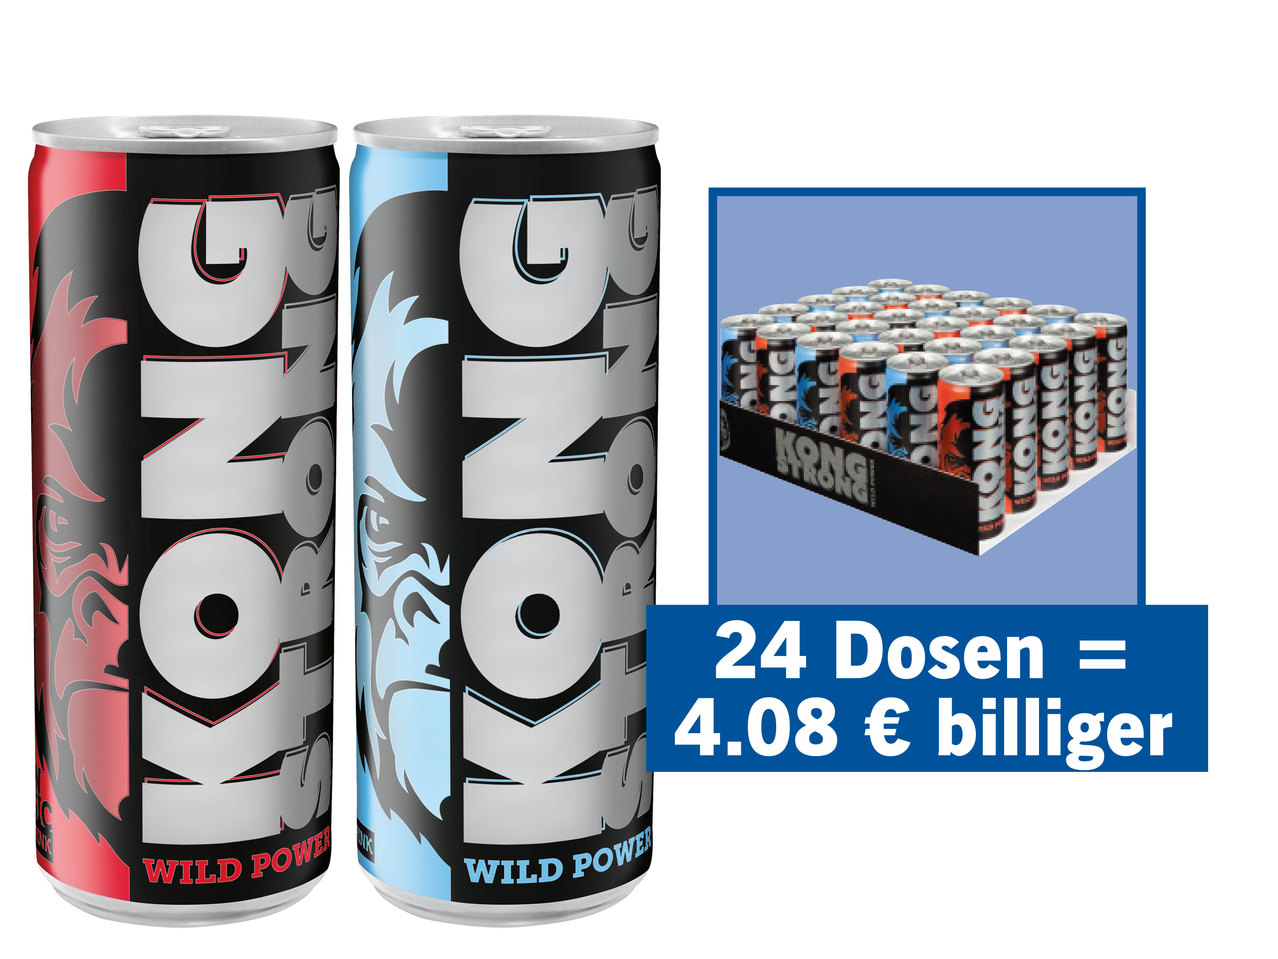 KONG STRONG Energy Drink